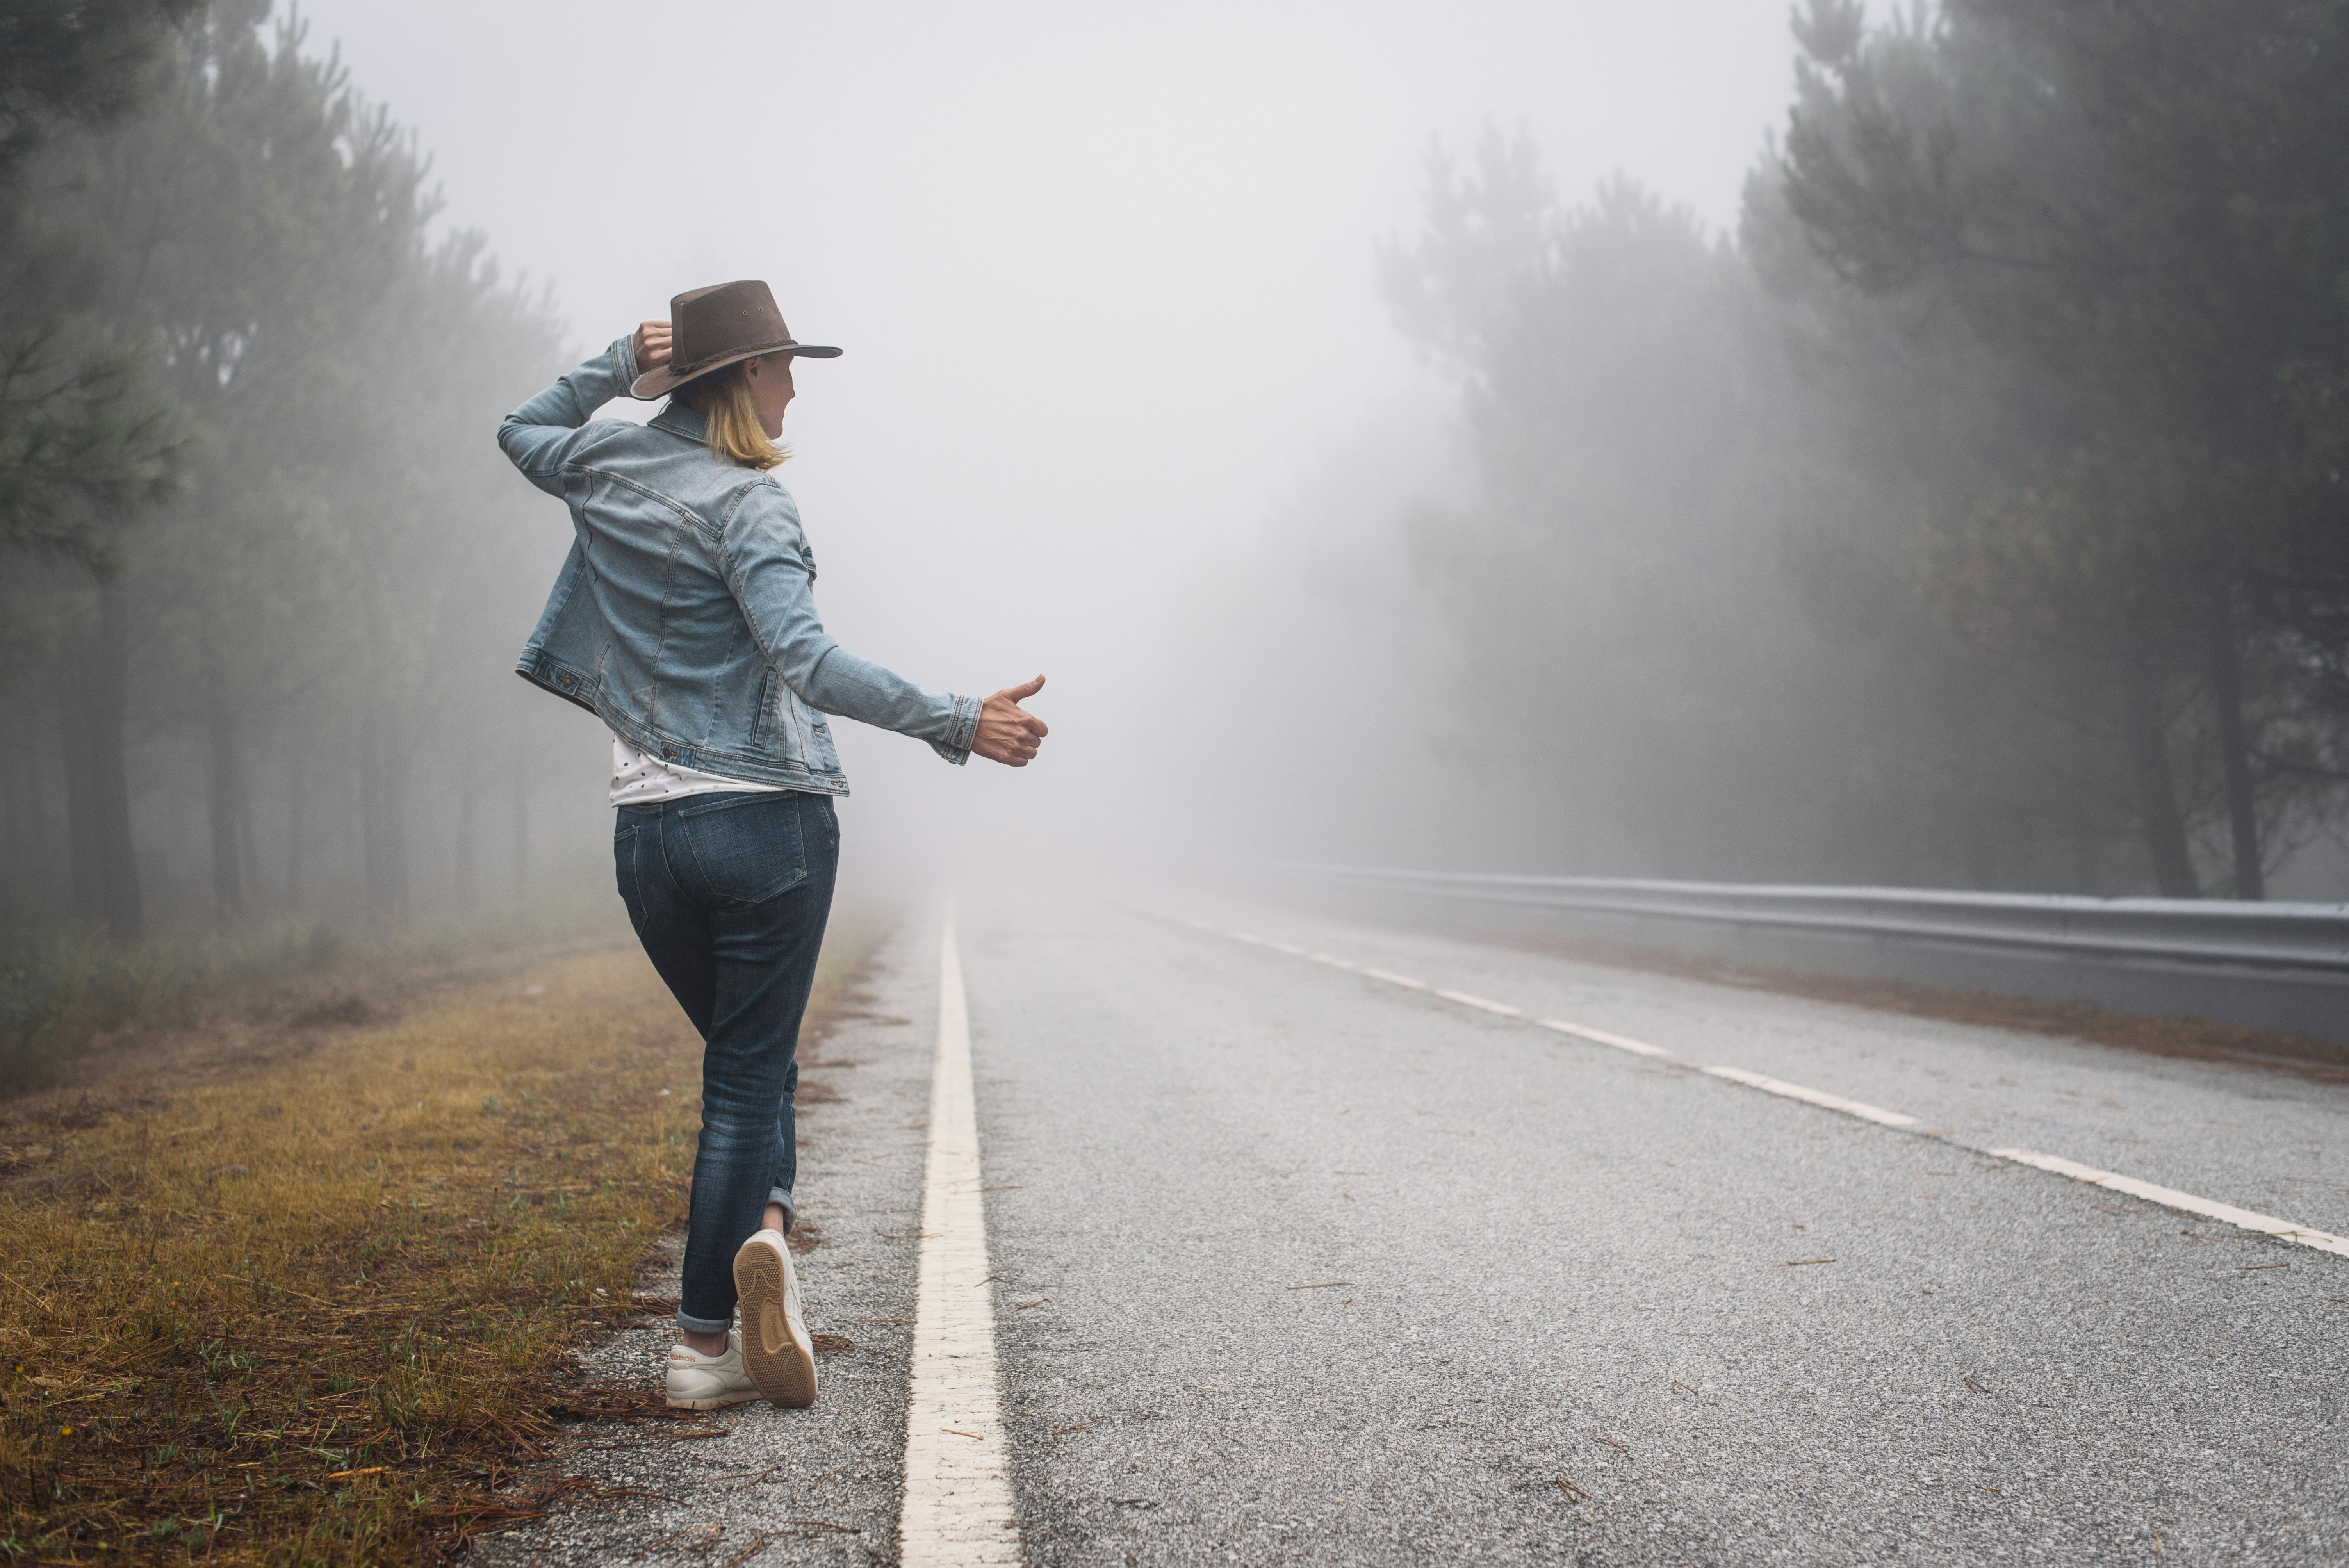 Hitchhiking on the foggy road.